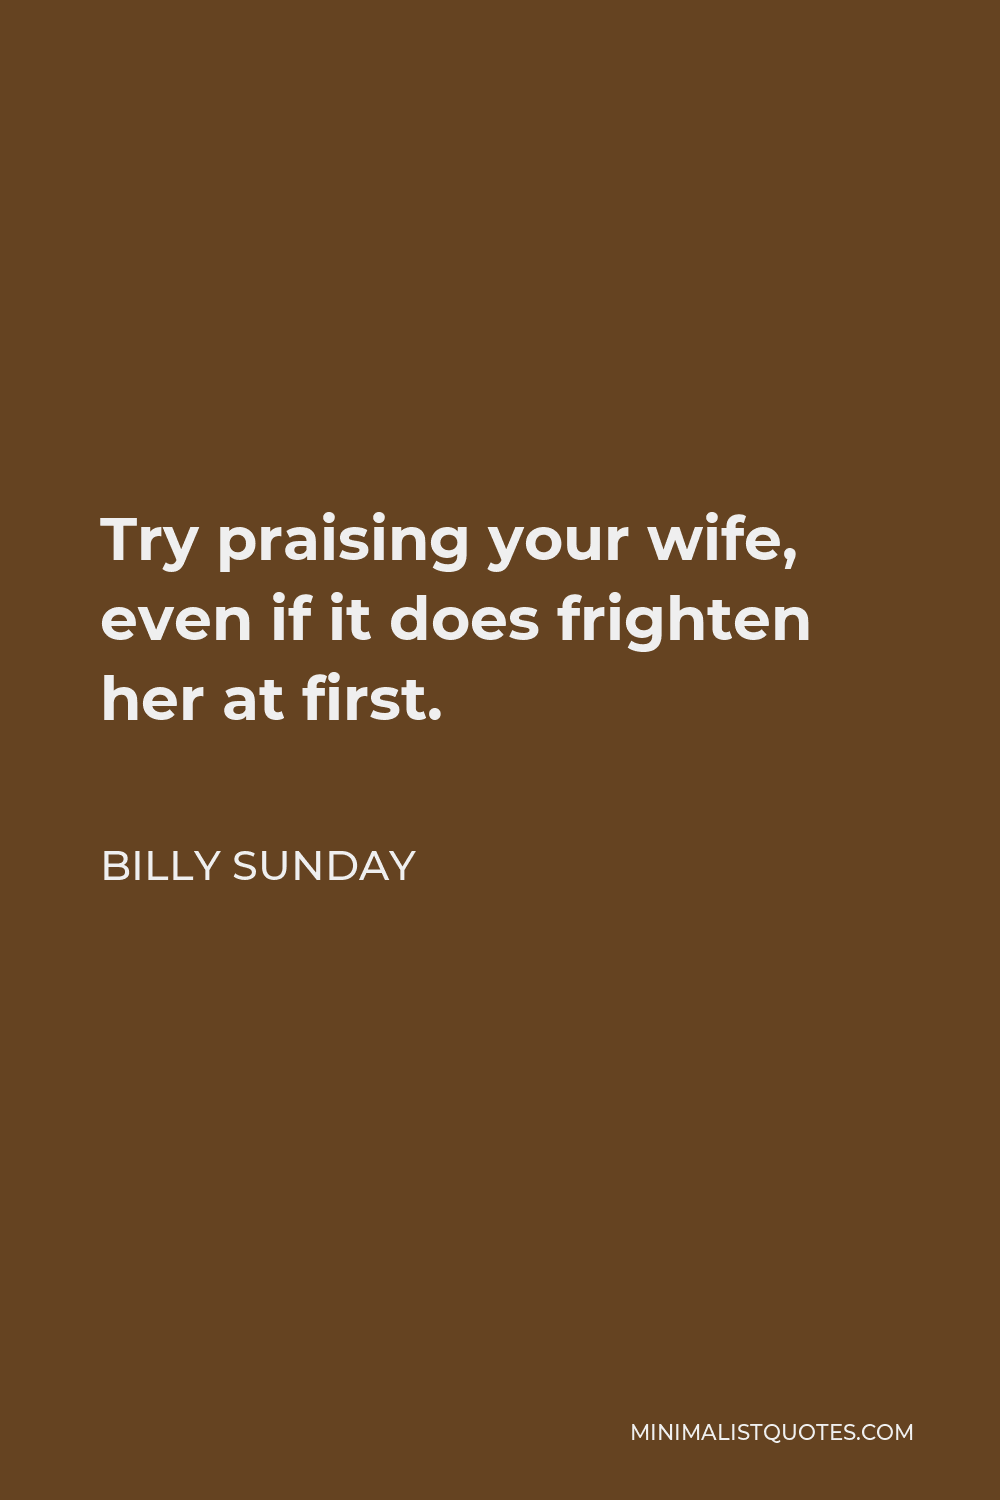 Billy Sunday Quote - Try praising your wife, even if it does frighten her at first.